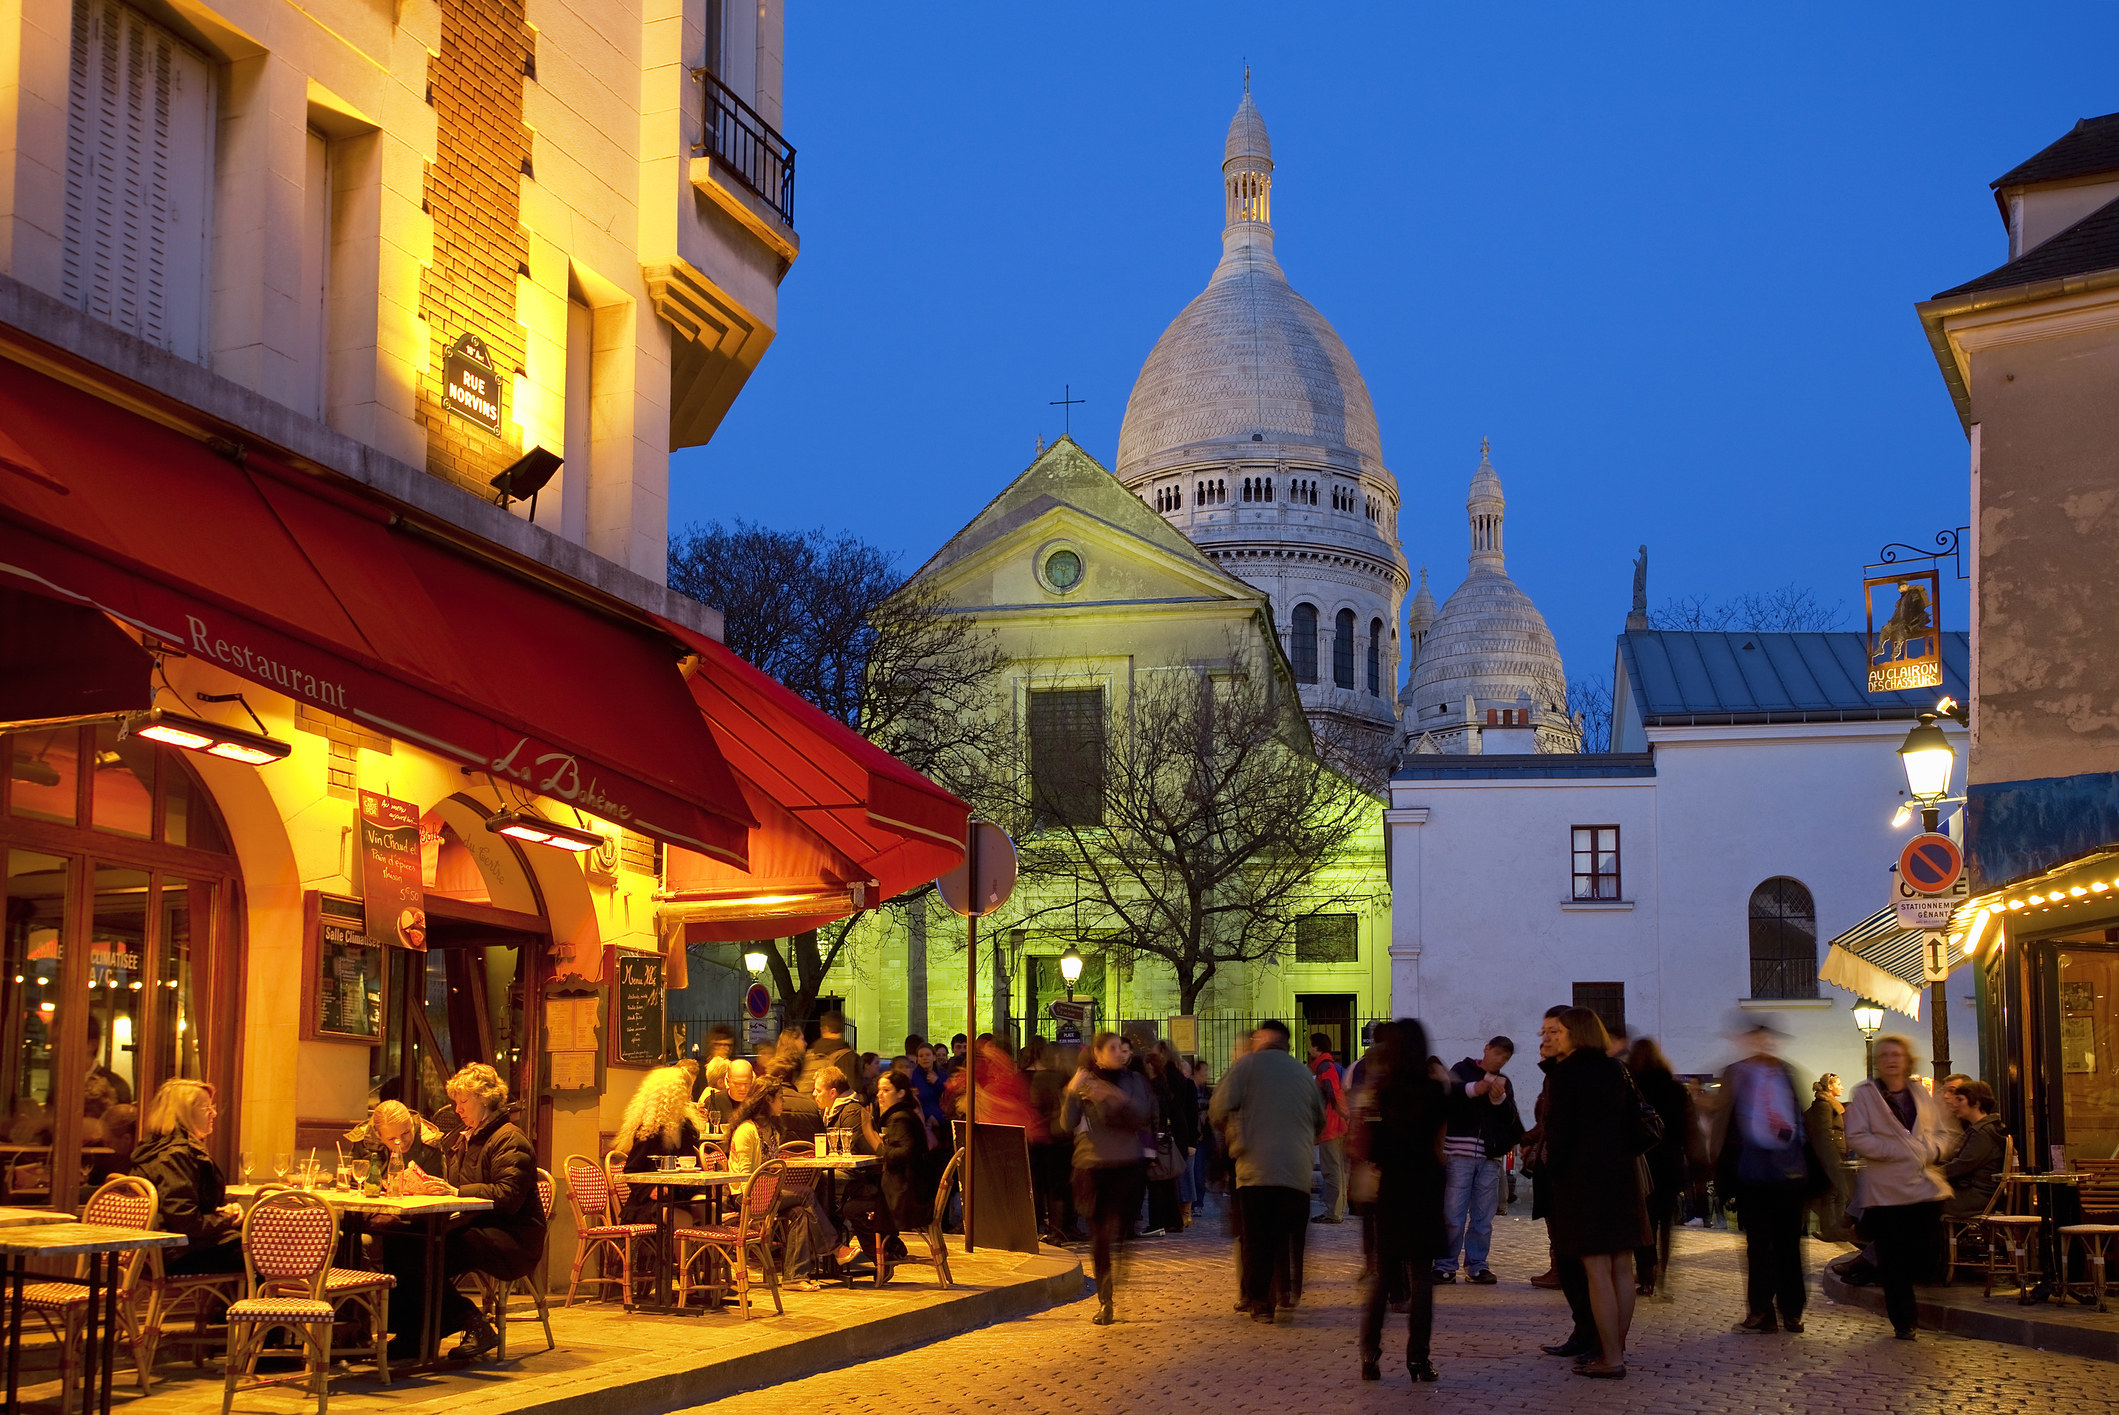 A bistro with a Basilica in the background